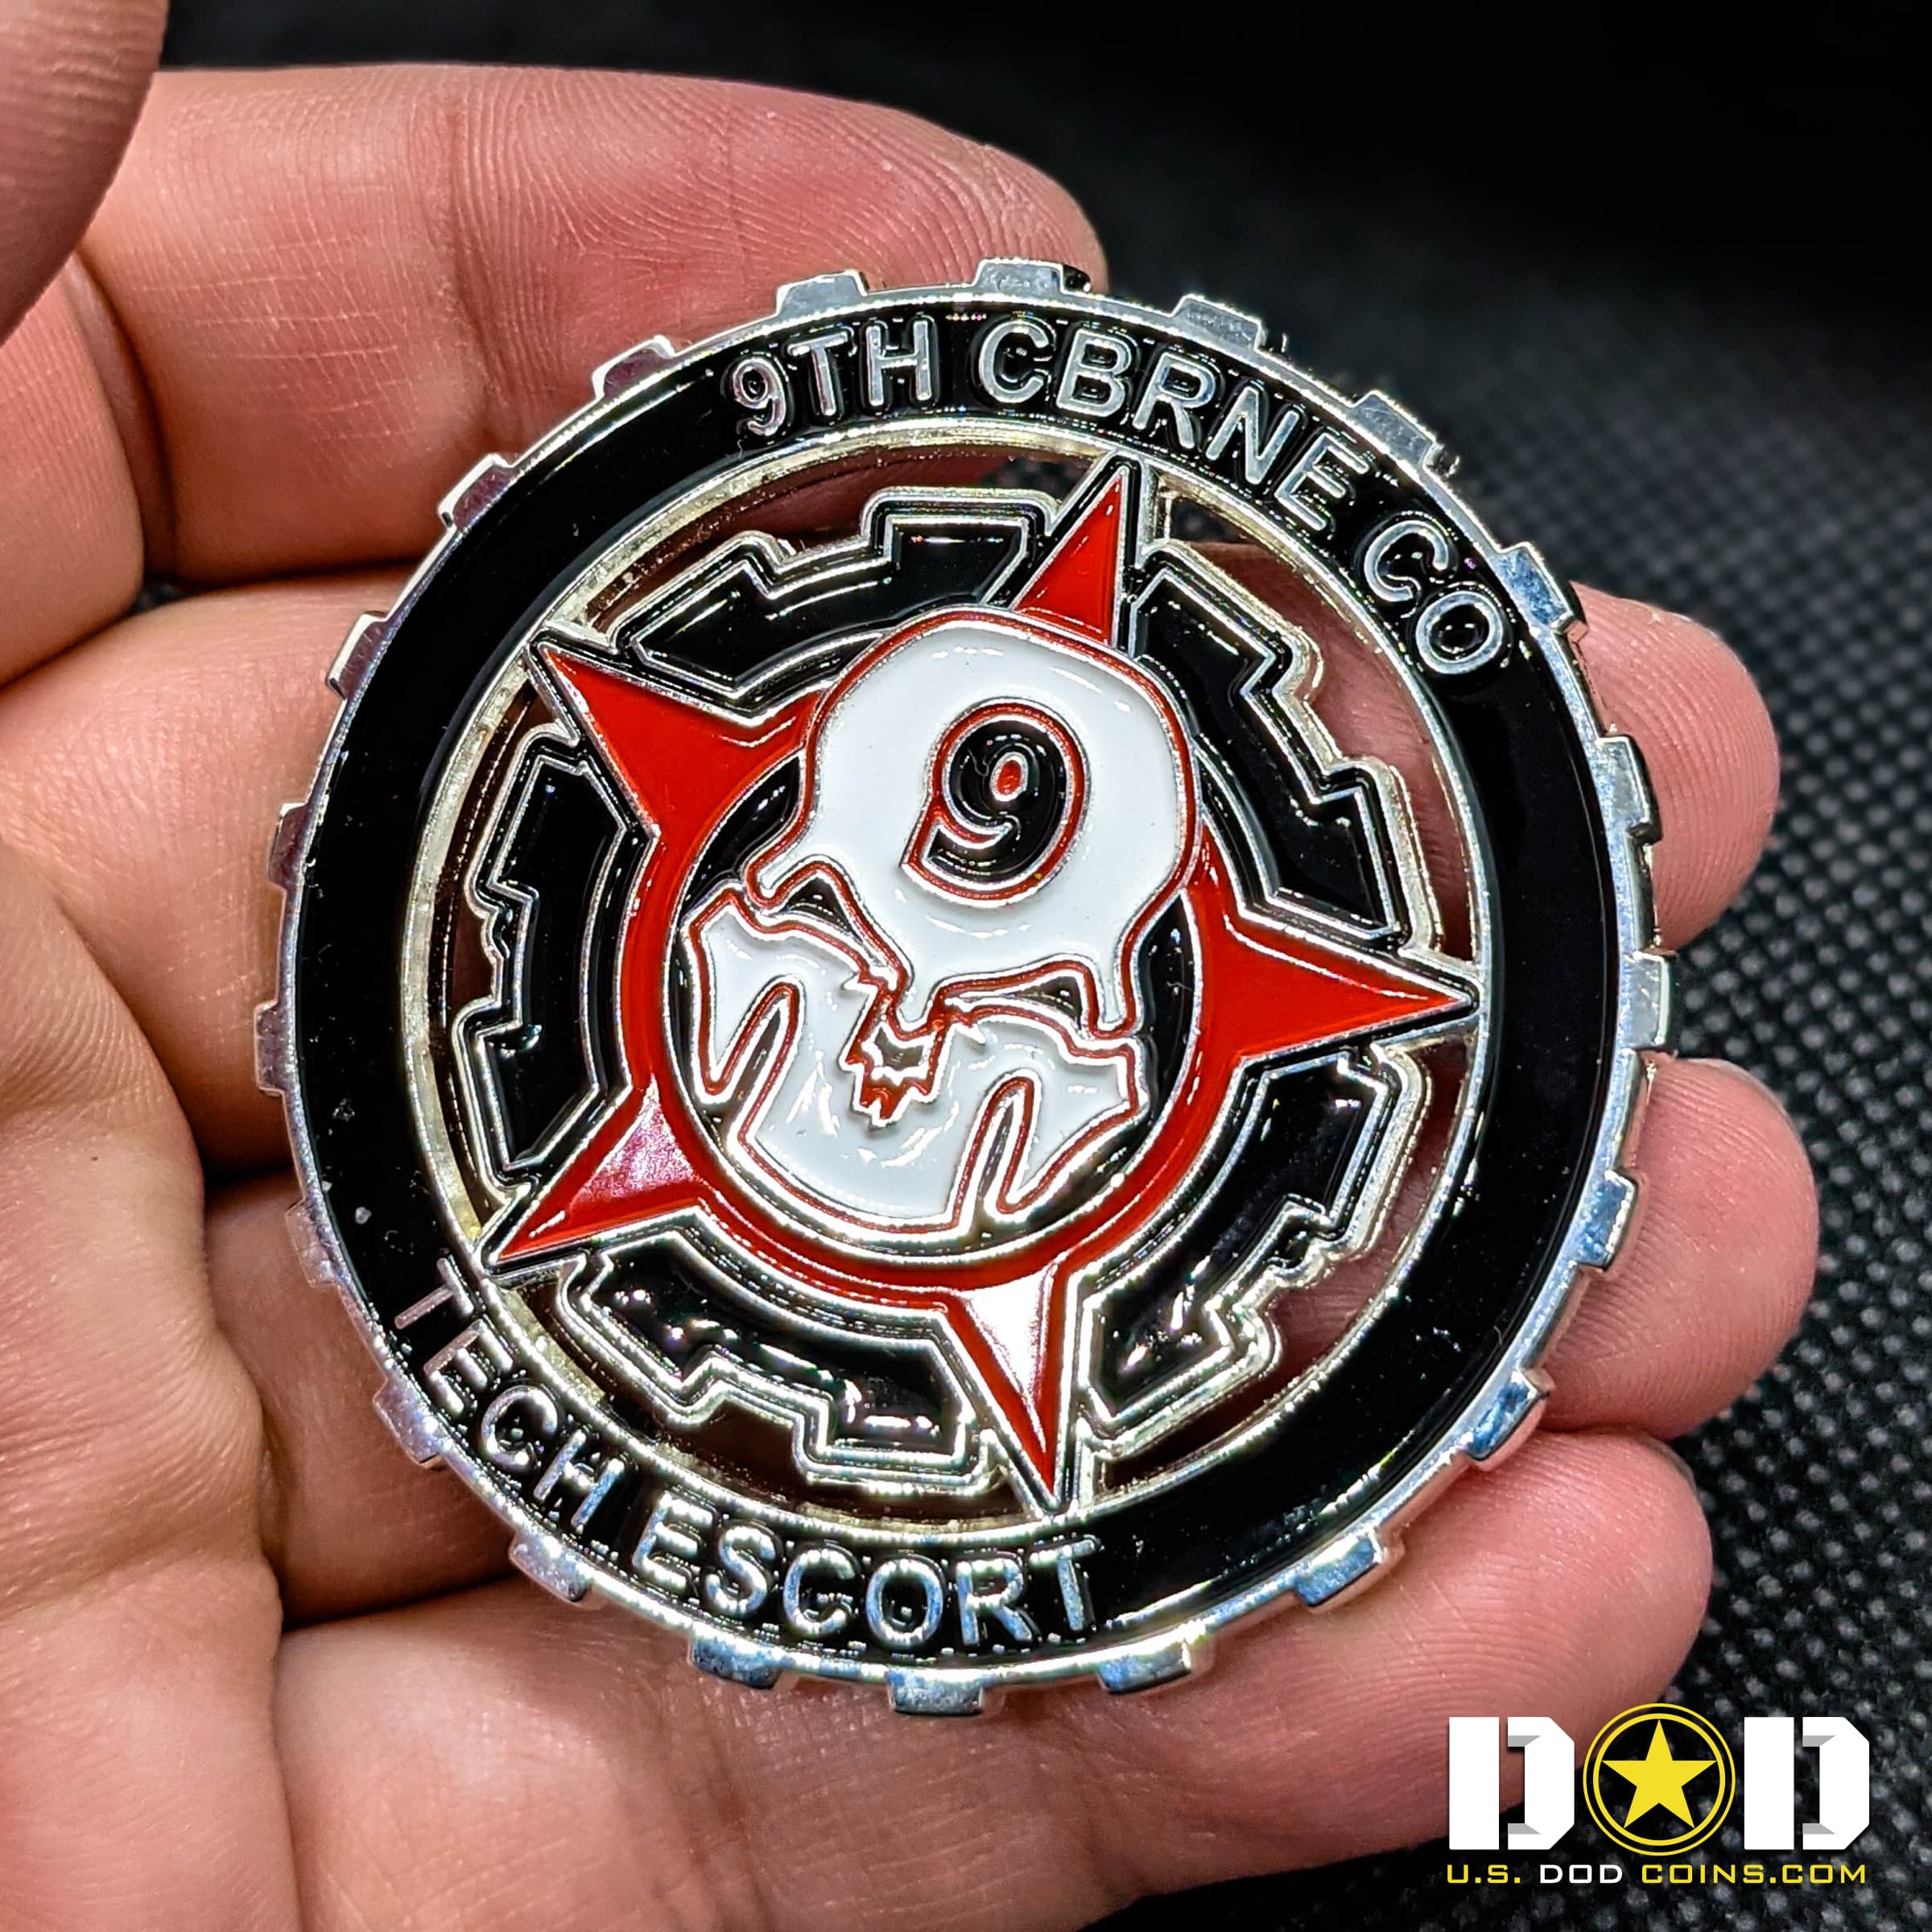 9th-CBRN-CO-Bounty-Huntyers-Challenge-Coin_0002_USDODCoins-Challenge-Coins-Examples-46